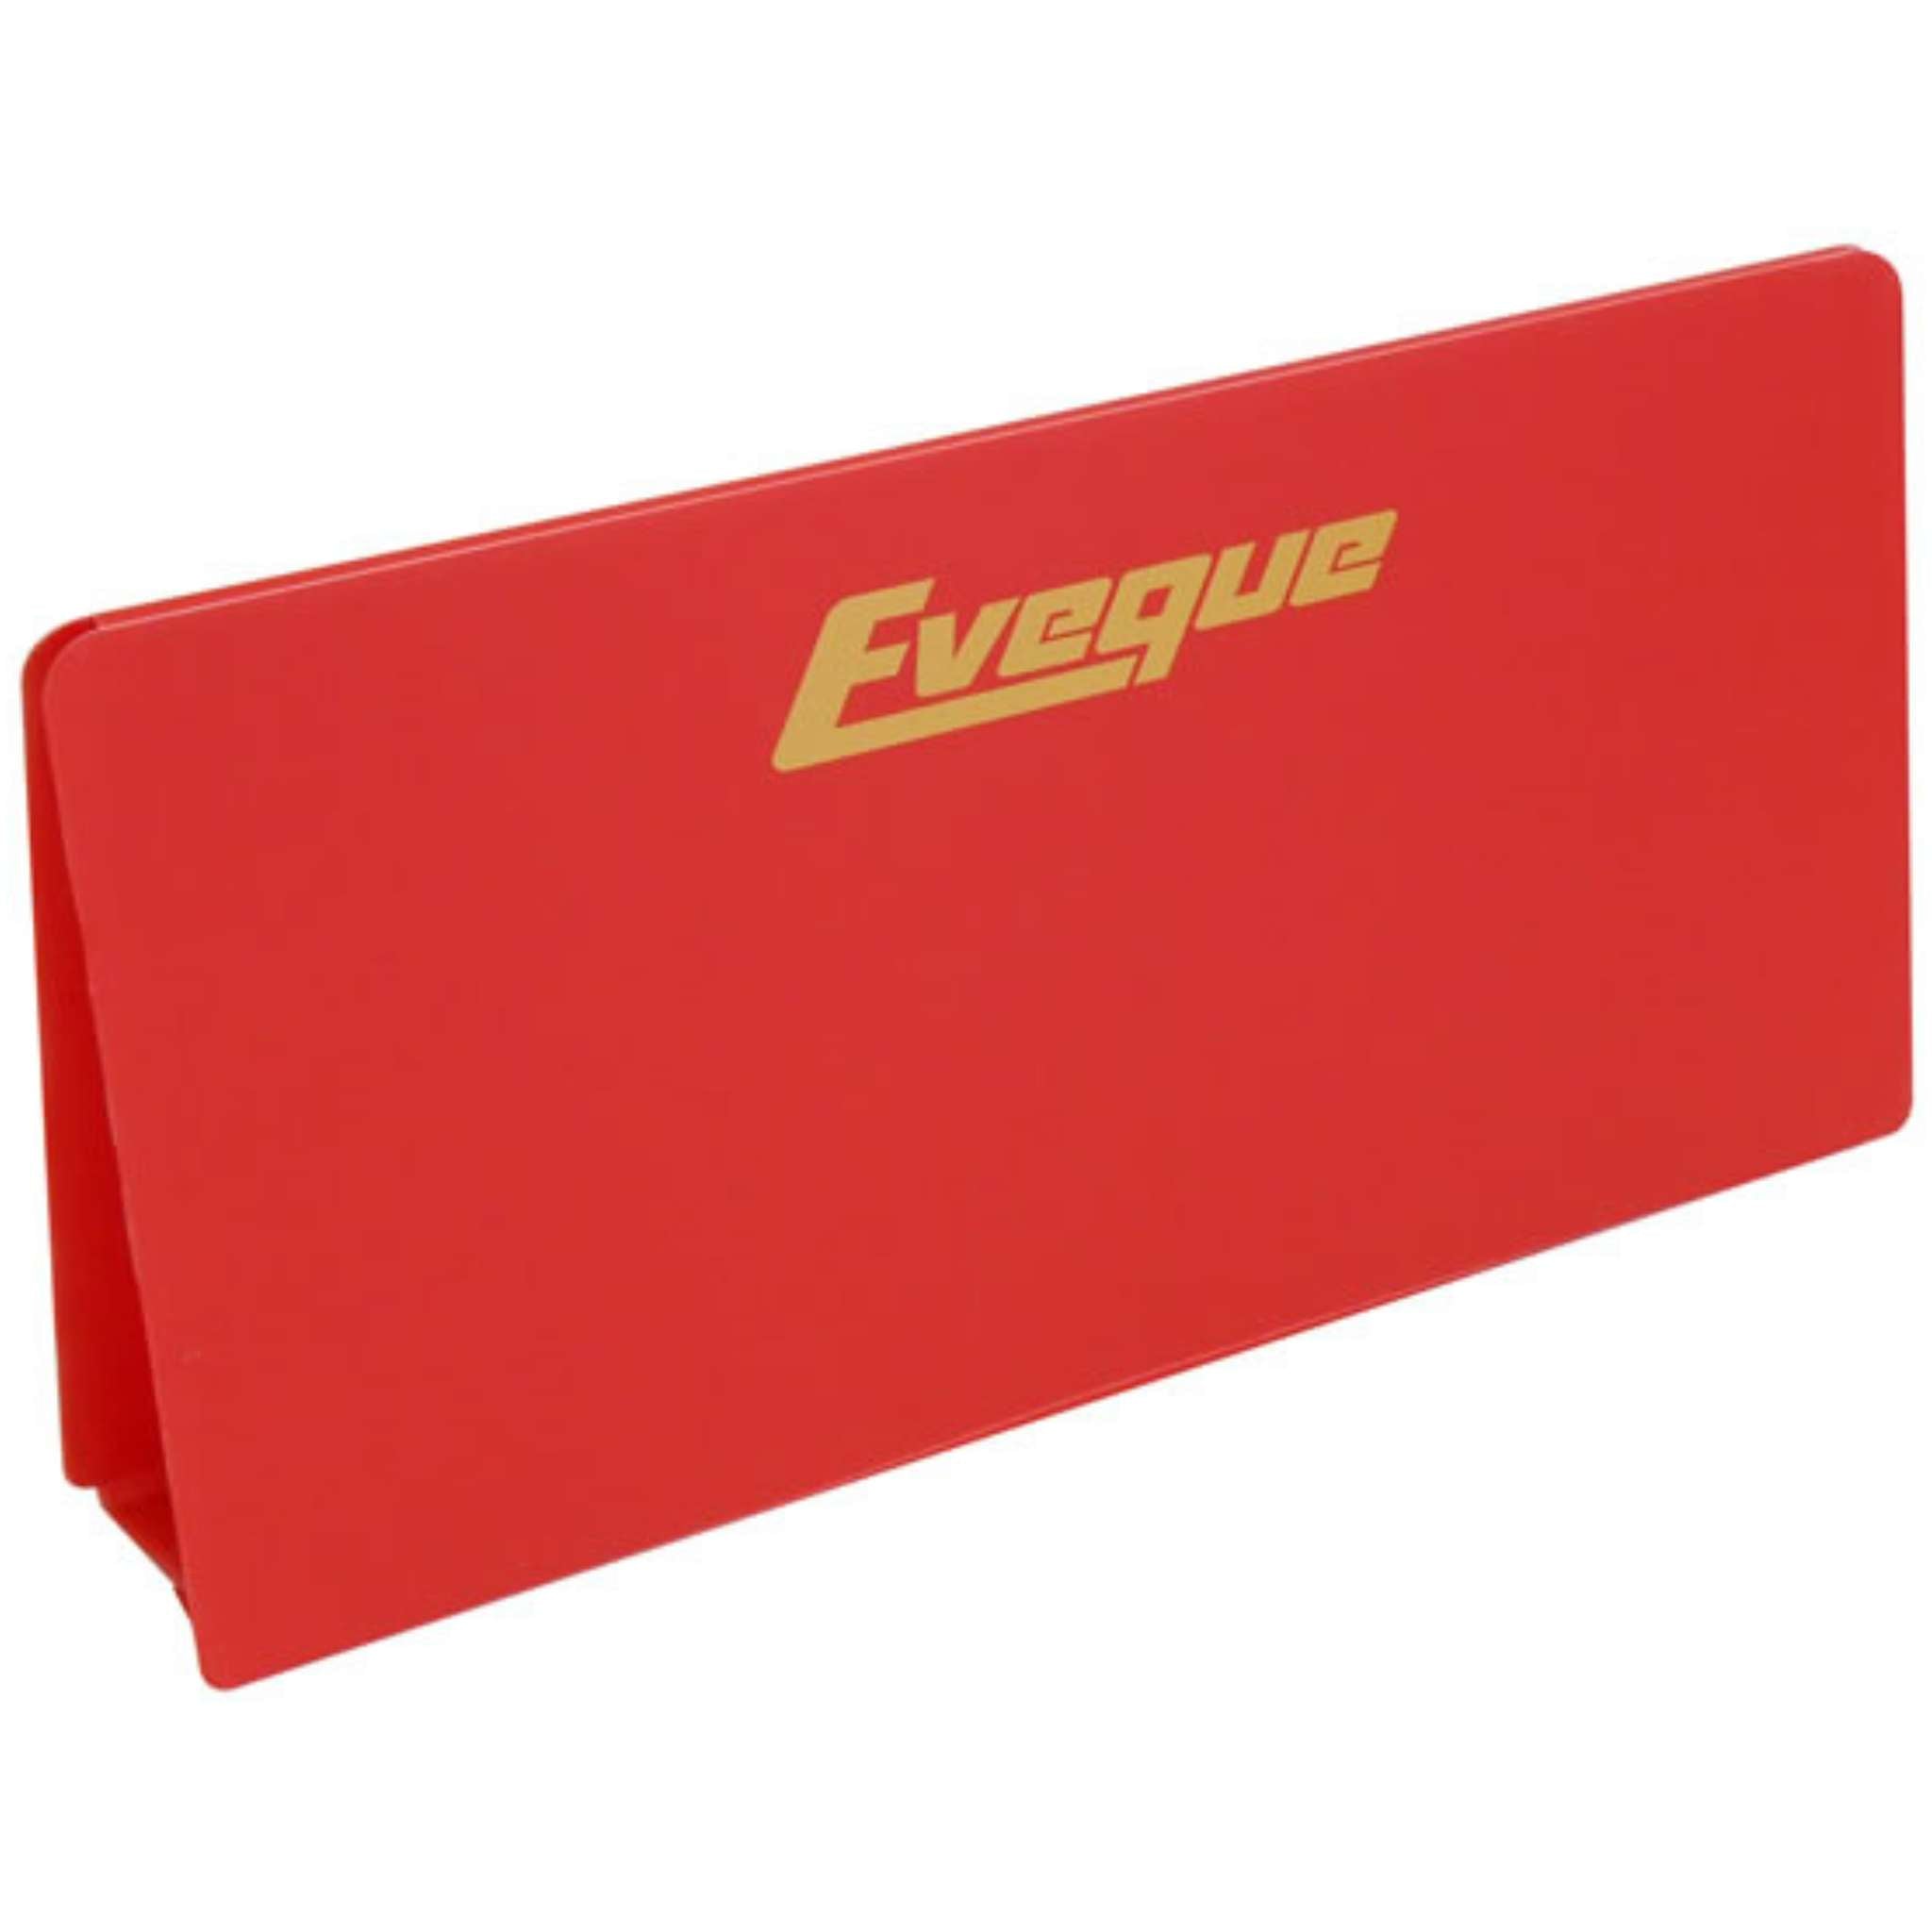 Eveque Sportshall Hurdles | Folded Plastic for schools | 1m wide by 40cm or 50cm high | Red